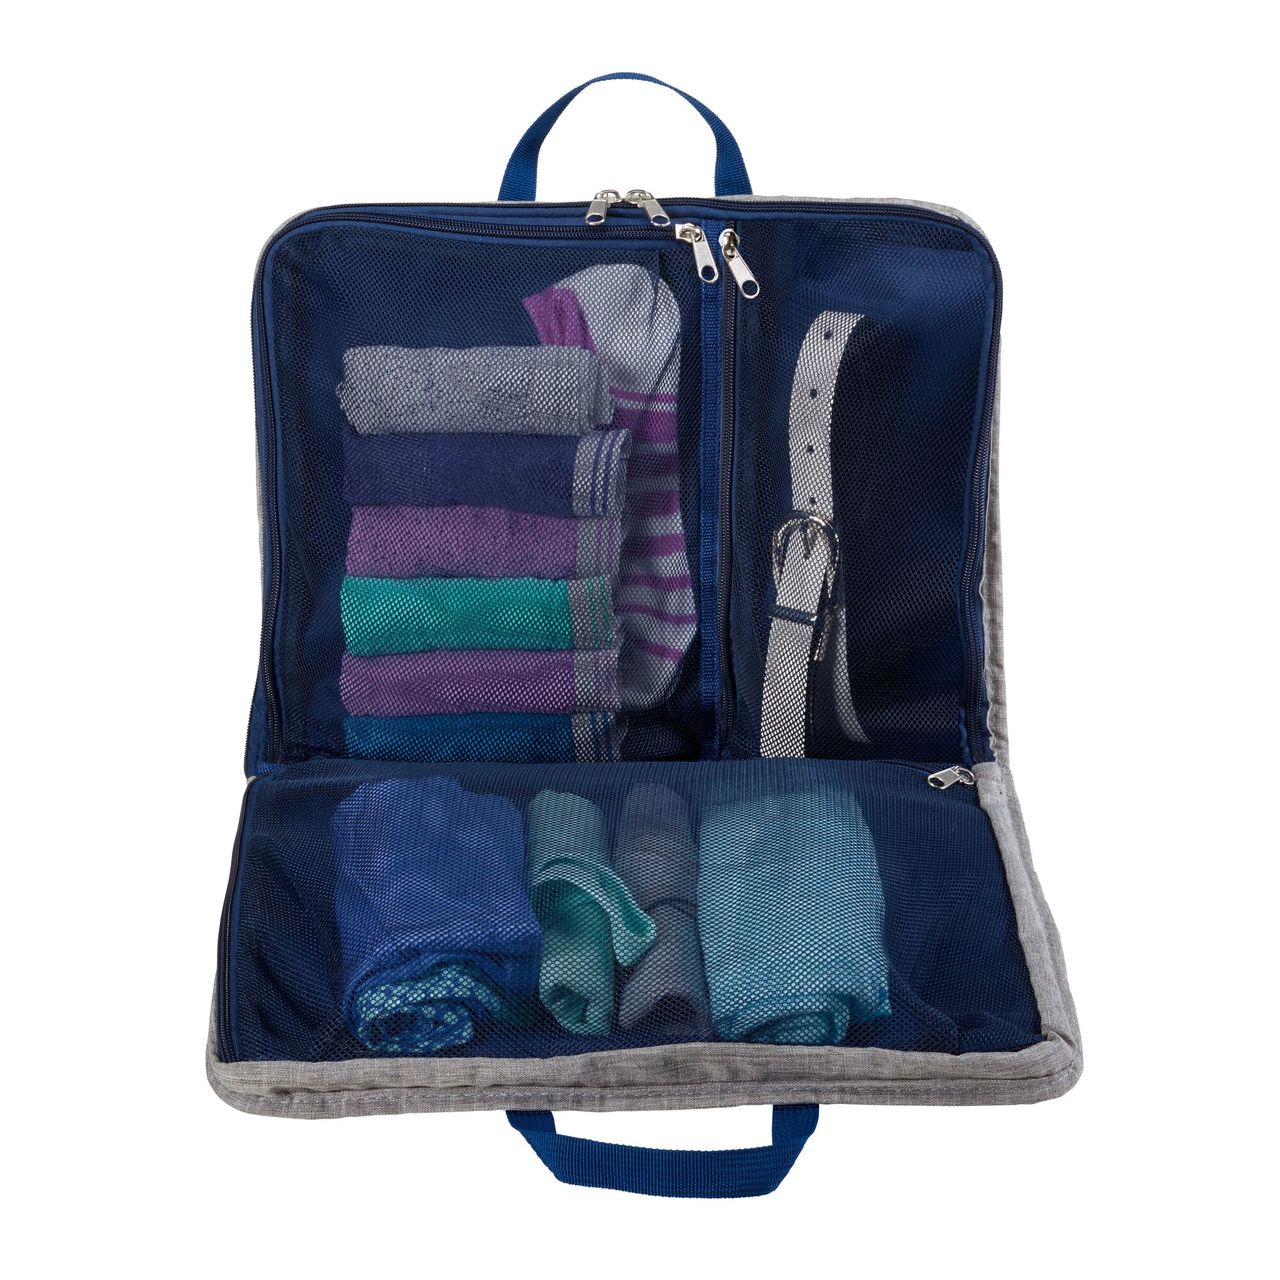 Lewis N. Clark Deluxe Packing Organizer, Carry-On